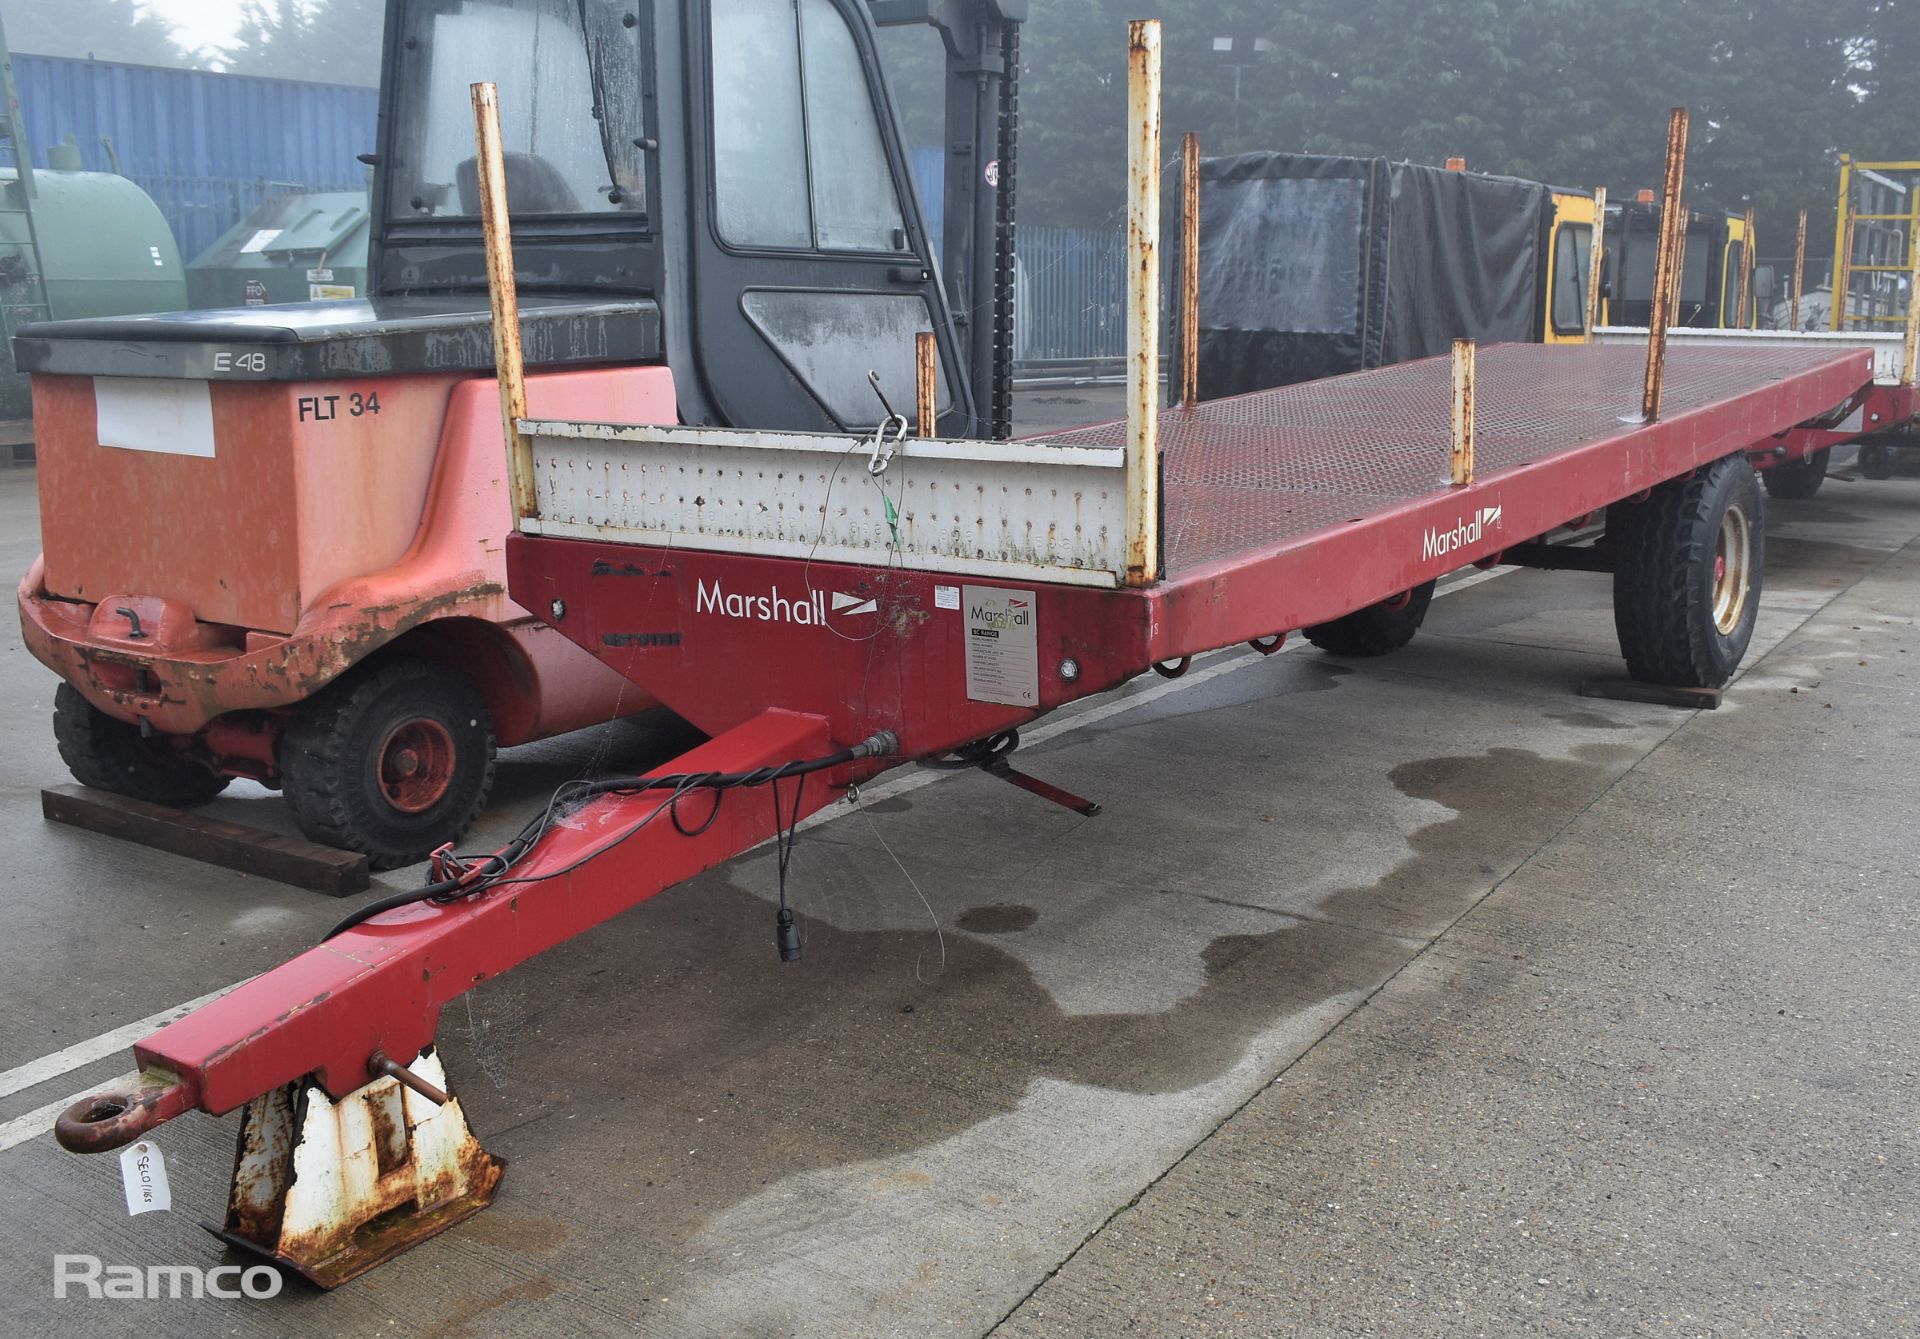 Marshall BC18N 2019 single axle flatbed trailer - 5000kg carrying capacity - serial number 107532 - Bild 6 aus 11